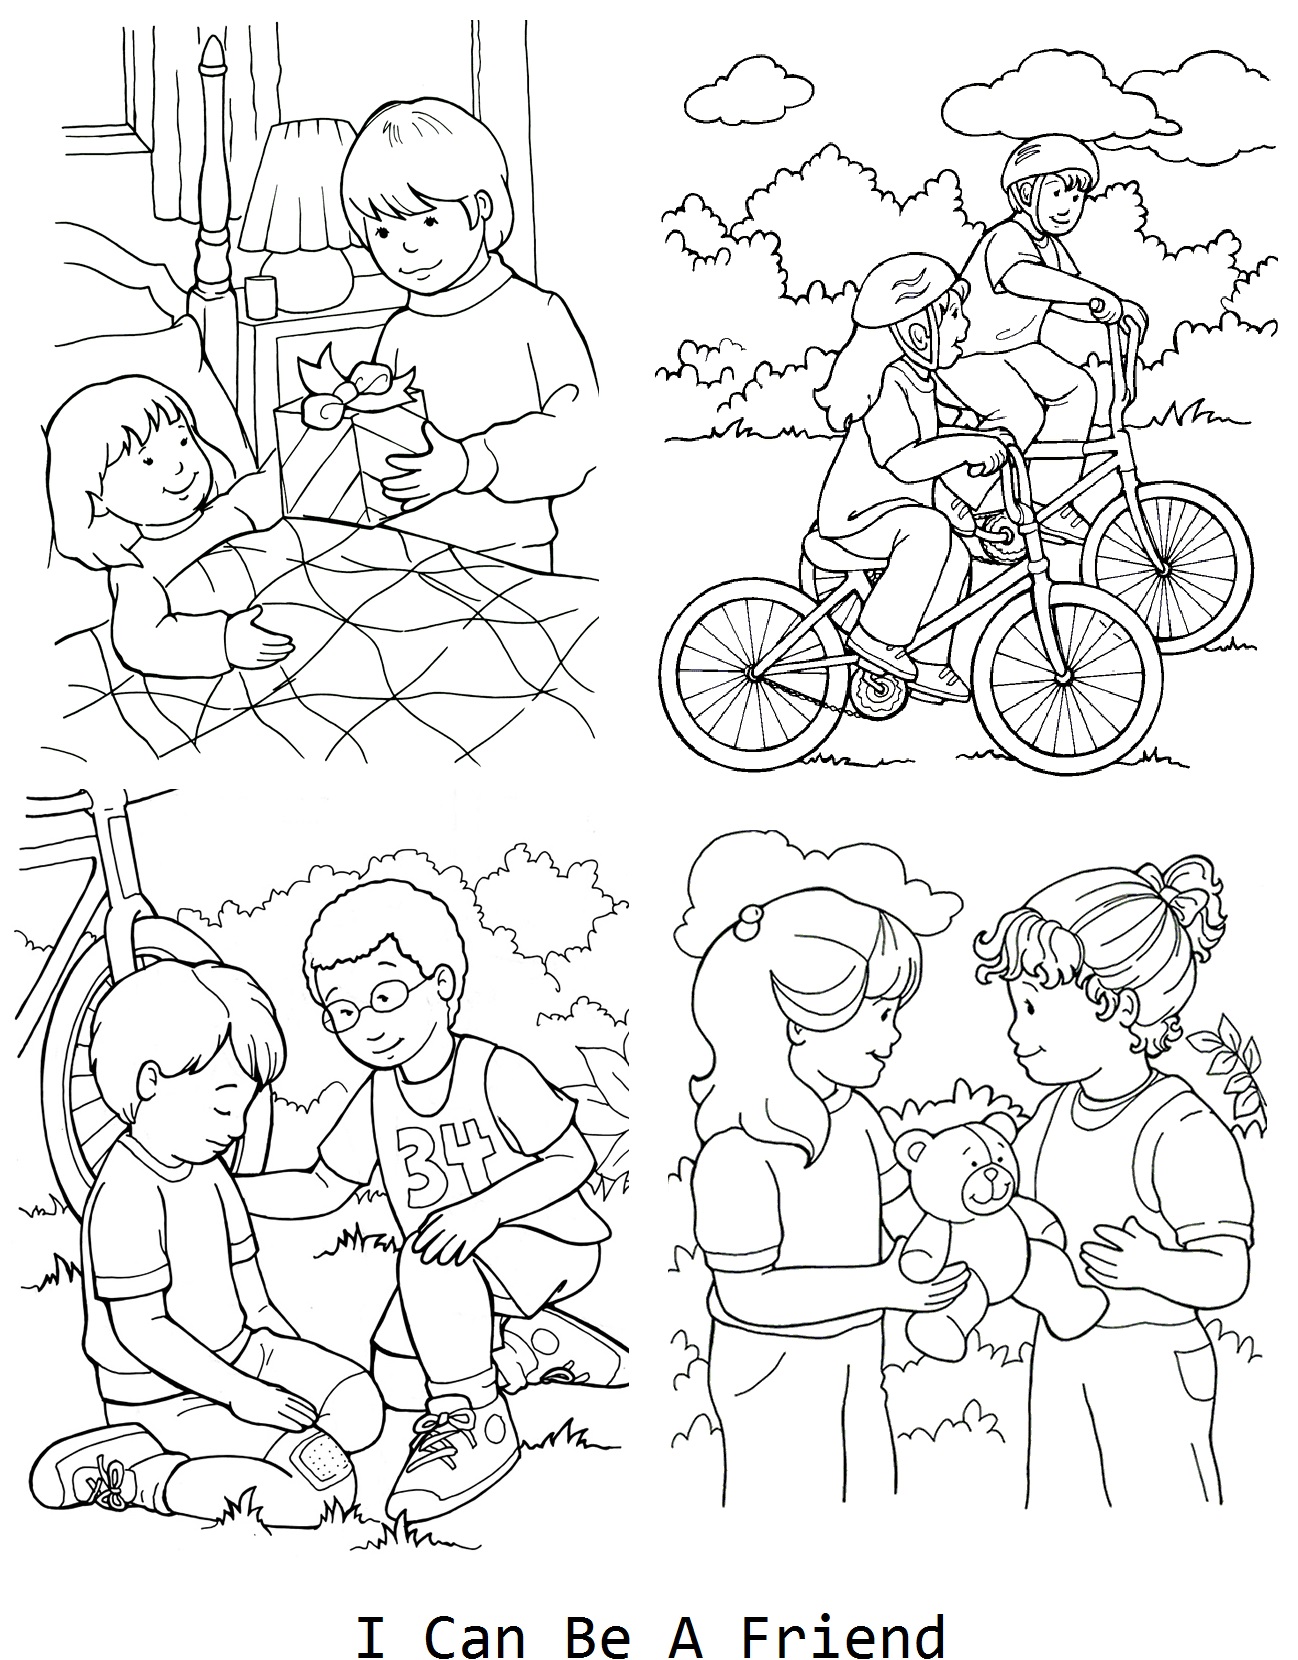 Lds Church Coloring Pages at GetColorings.com | Free ...